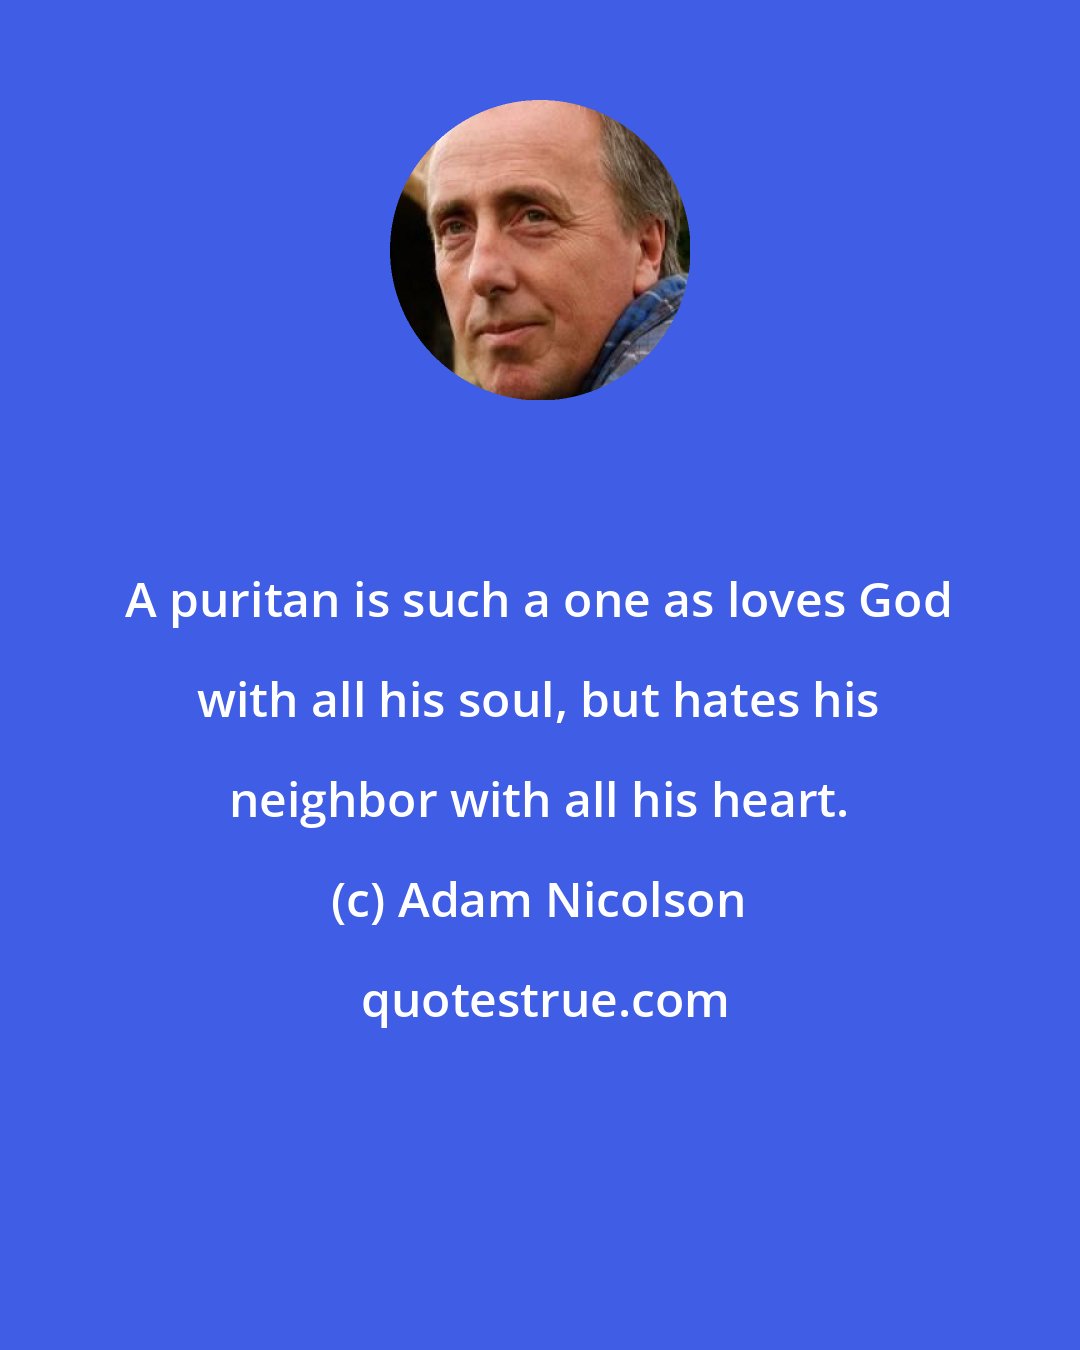 Adam Nicolson: A puritan is such a one as loves God with all his soul, but hates his neighbor with all his heart.